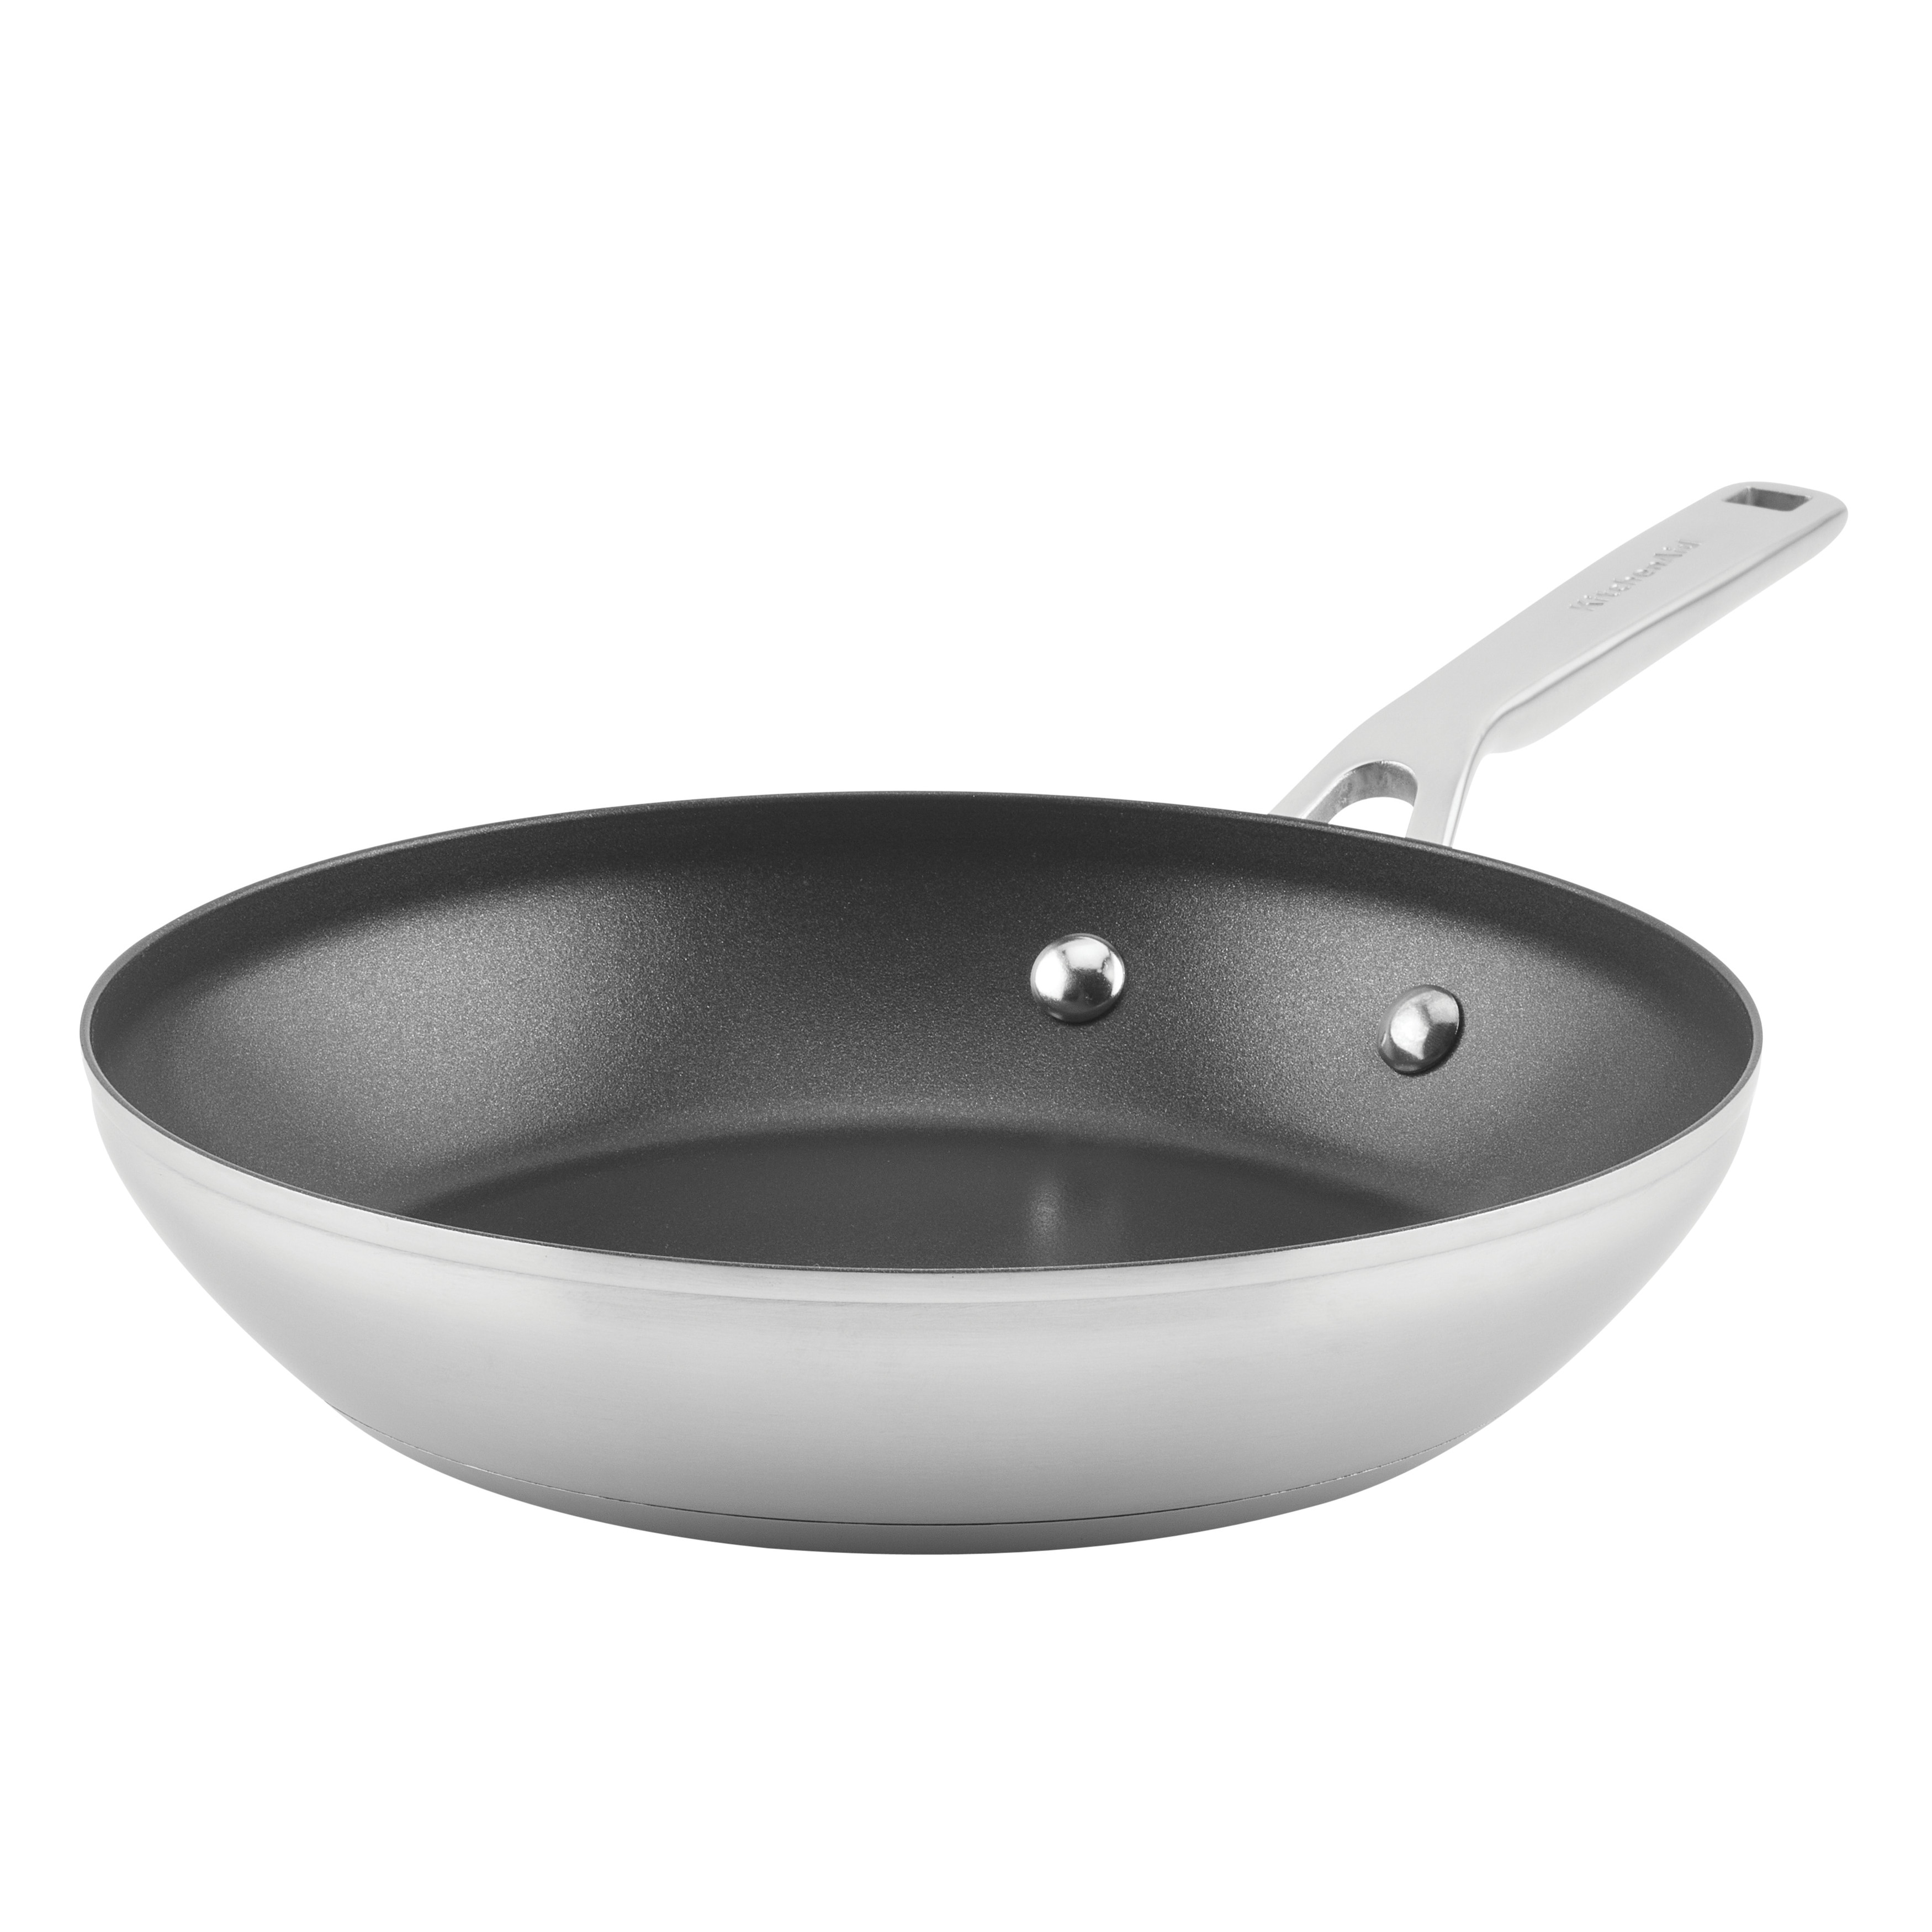 KitchenAid 3-Ply Base Stainless Steel Nonstick Induction Frying Pan,  9.5-Inch, Brushed Stainless Steel Bed Bath  Beyond 32085913